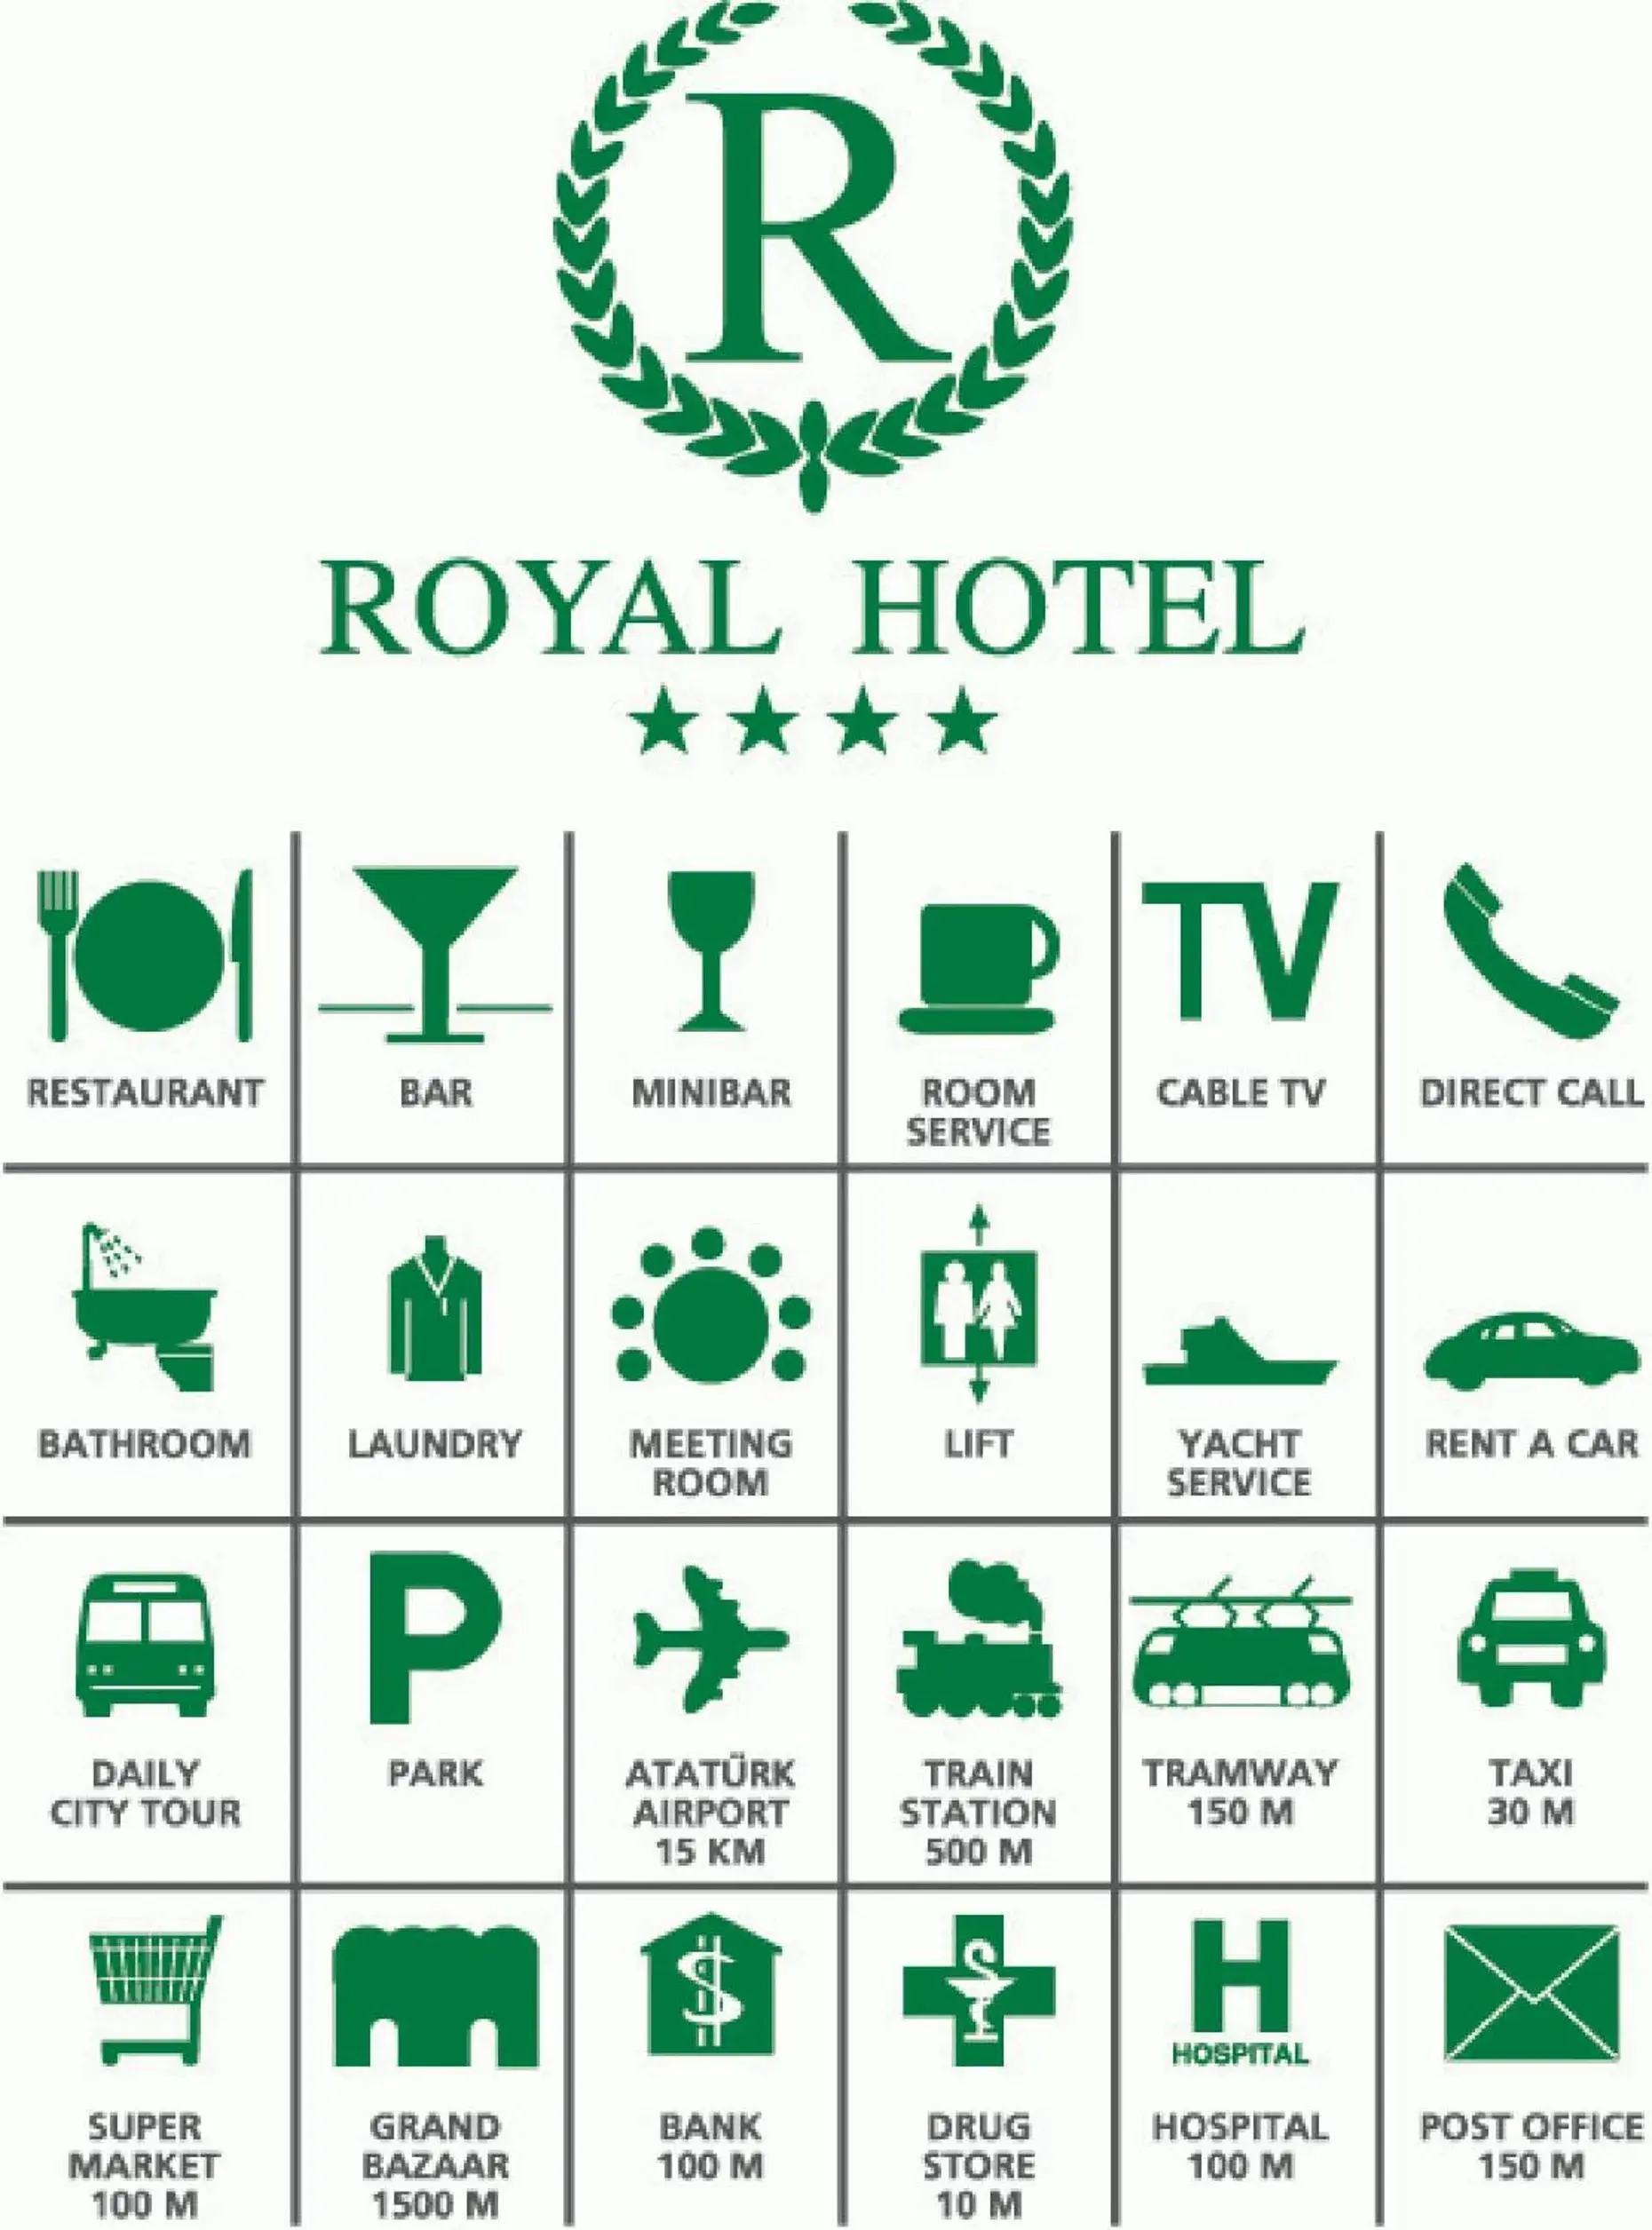 Property logo or sign in Istanbul Royal Hotel